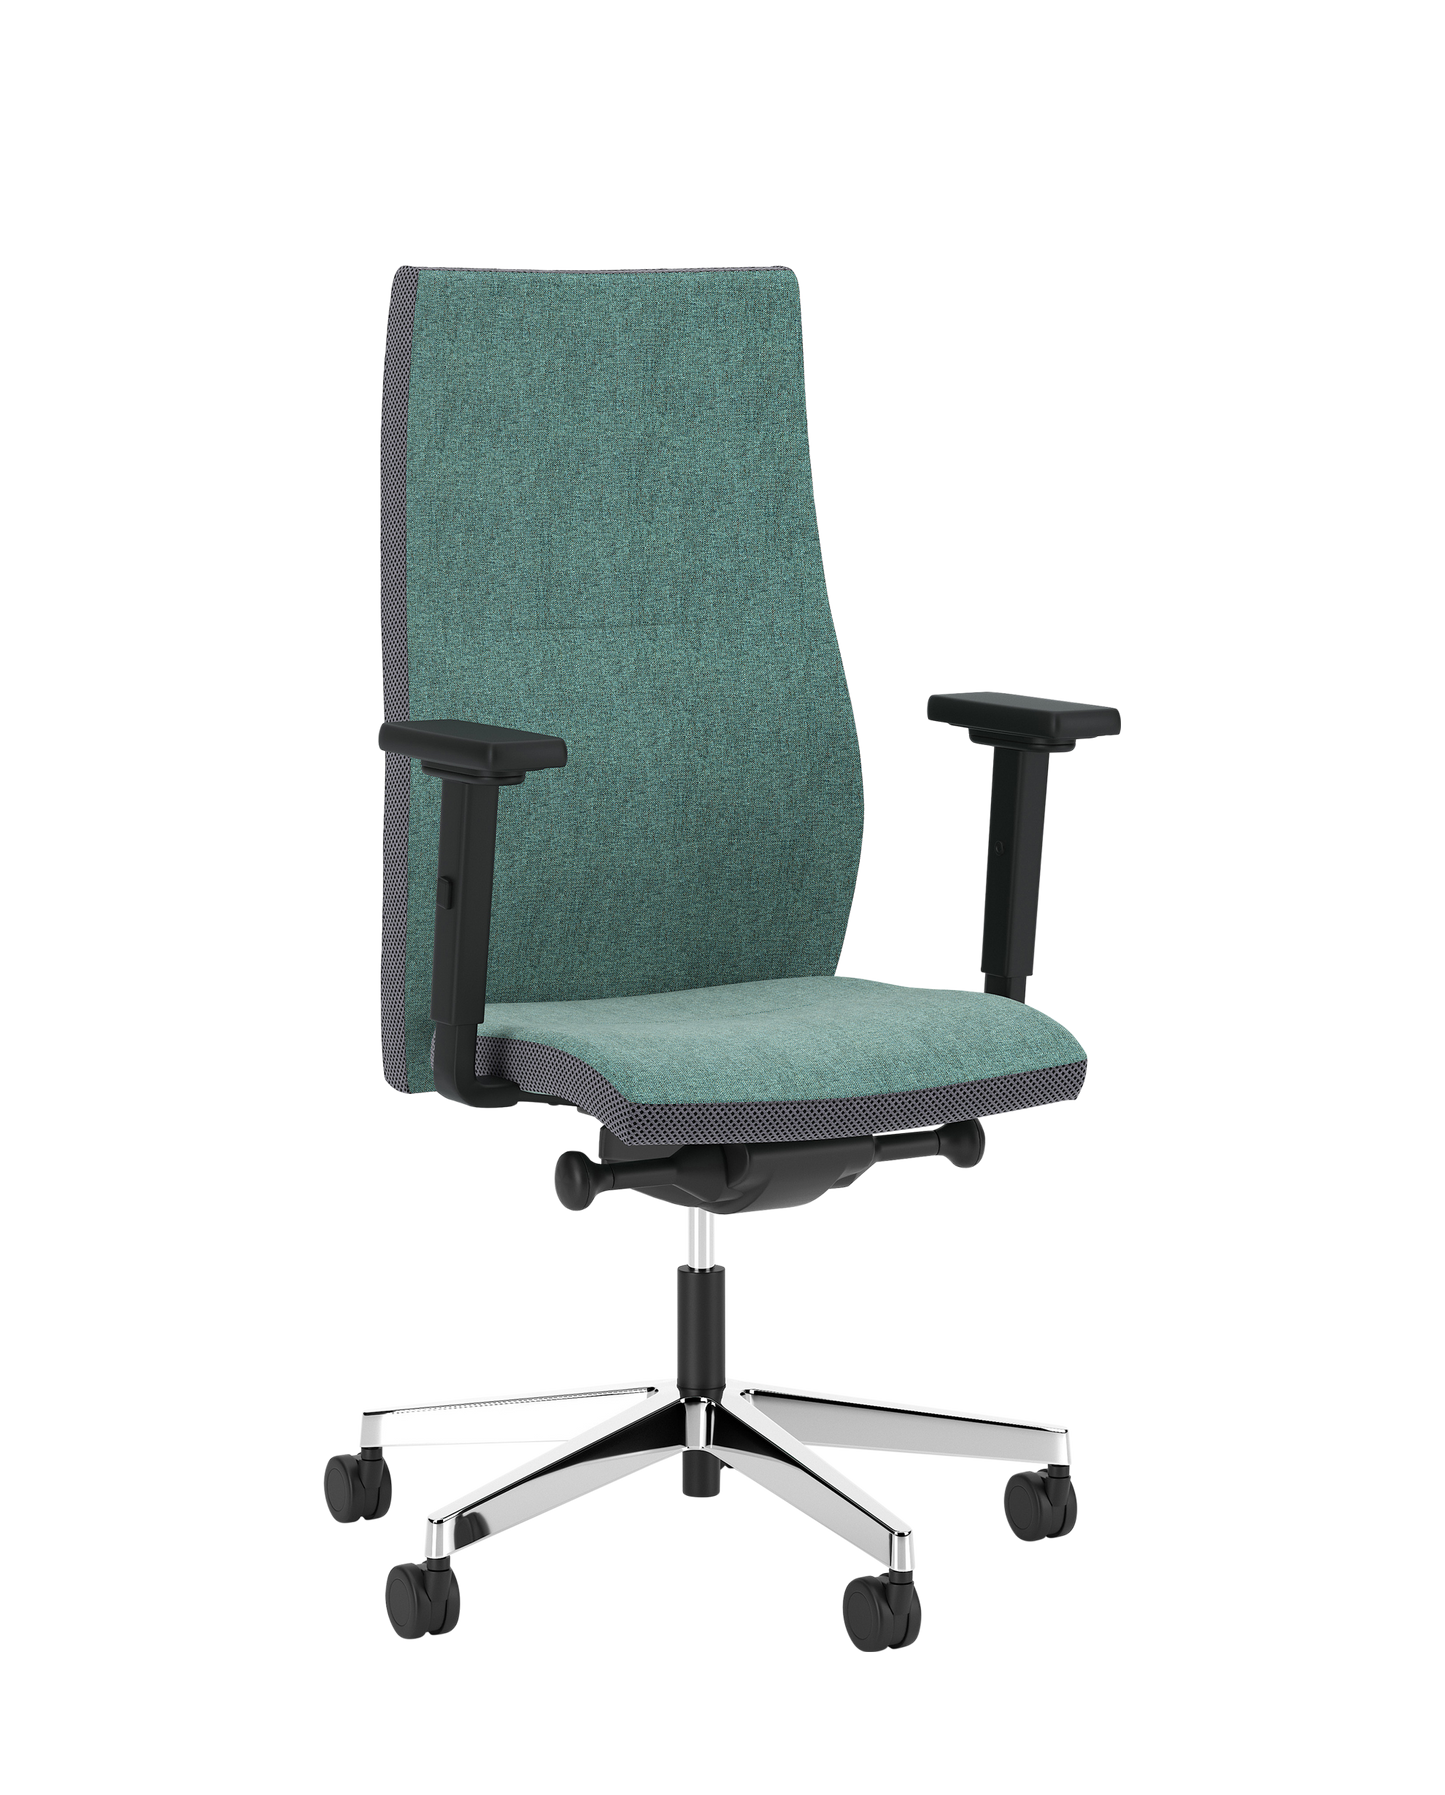 So-One Office Chair